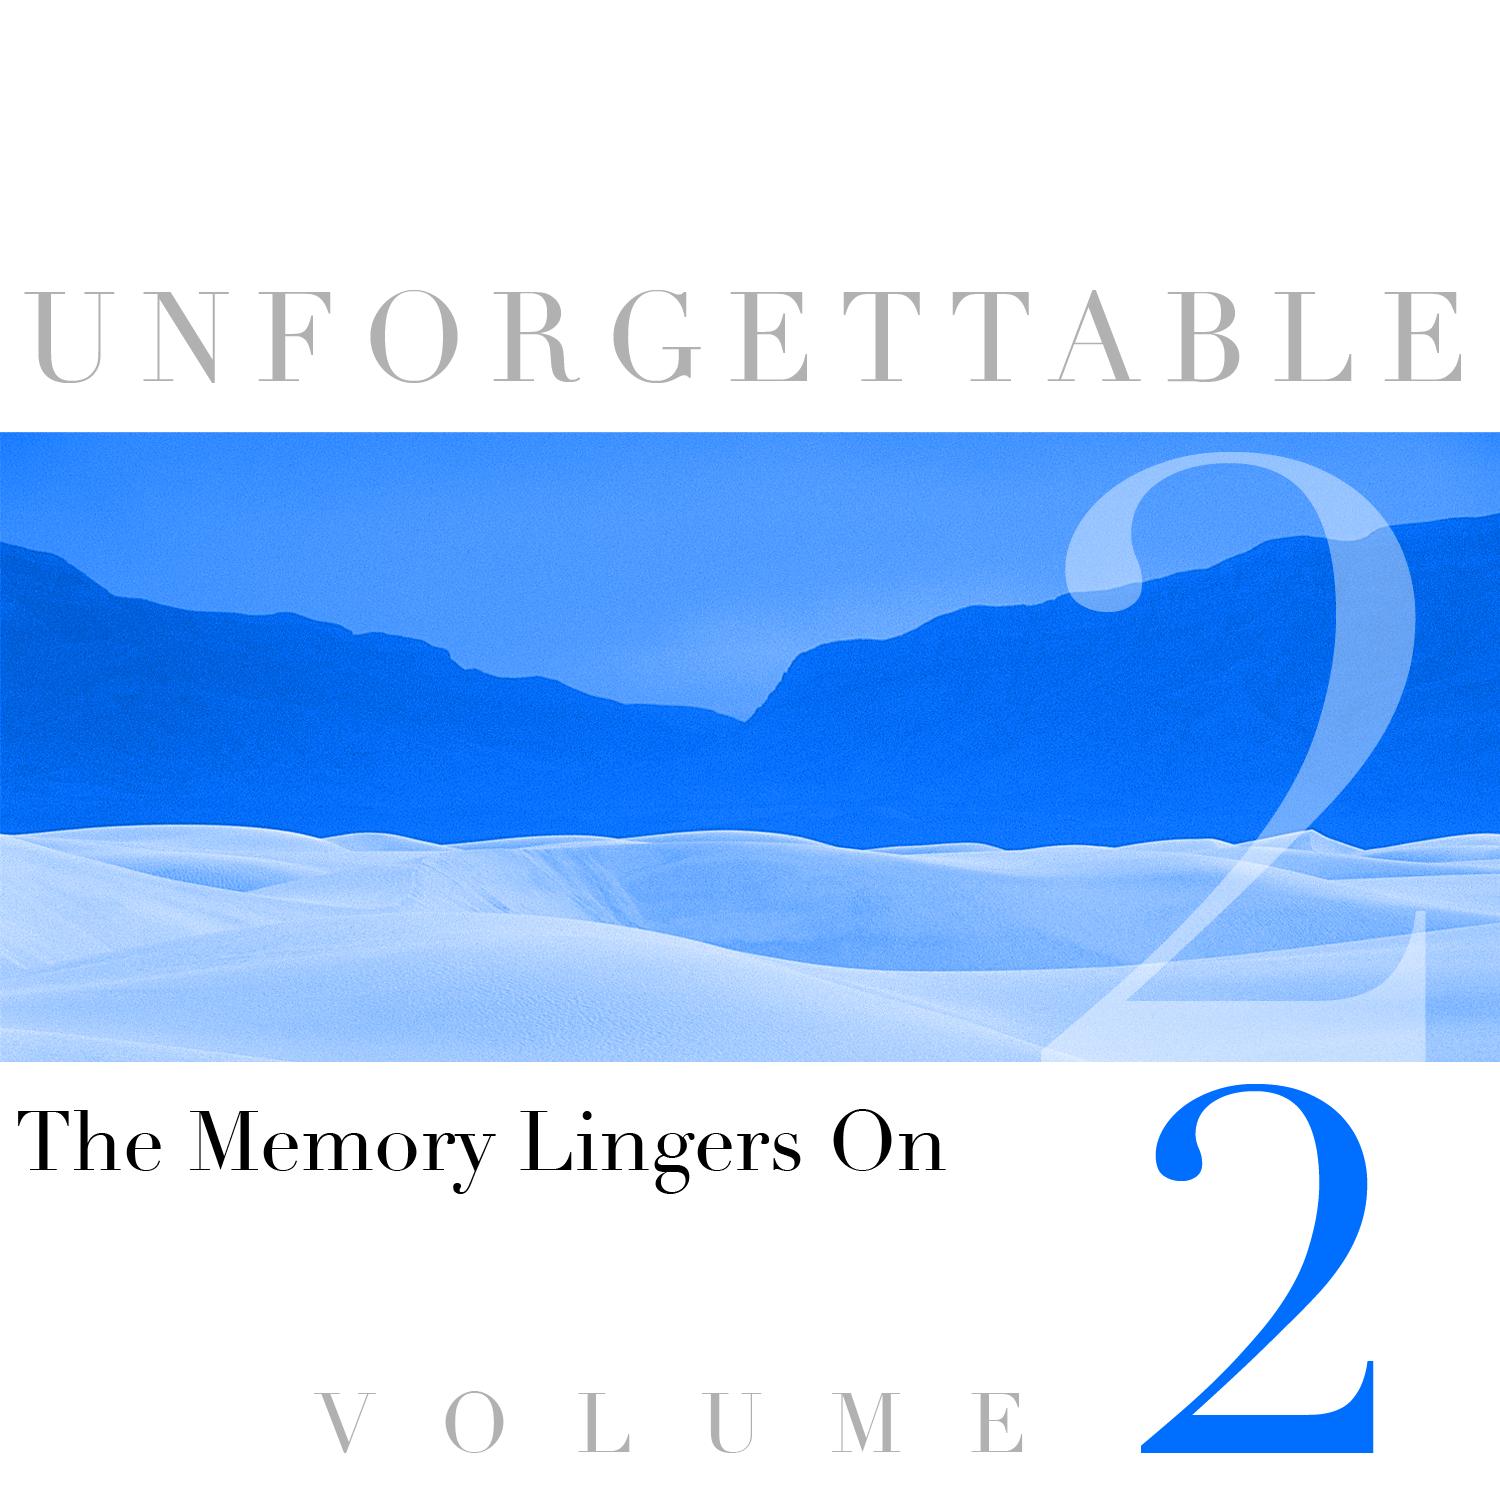 Unforgettable - The Memory Lingers On Volume 2